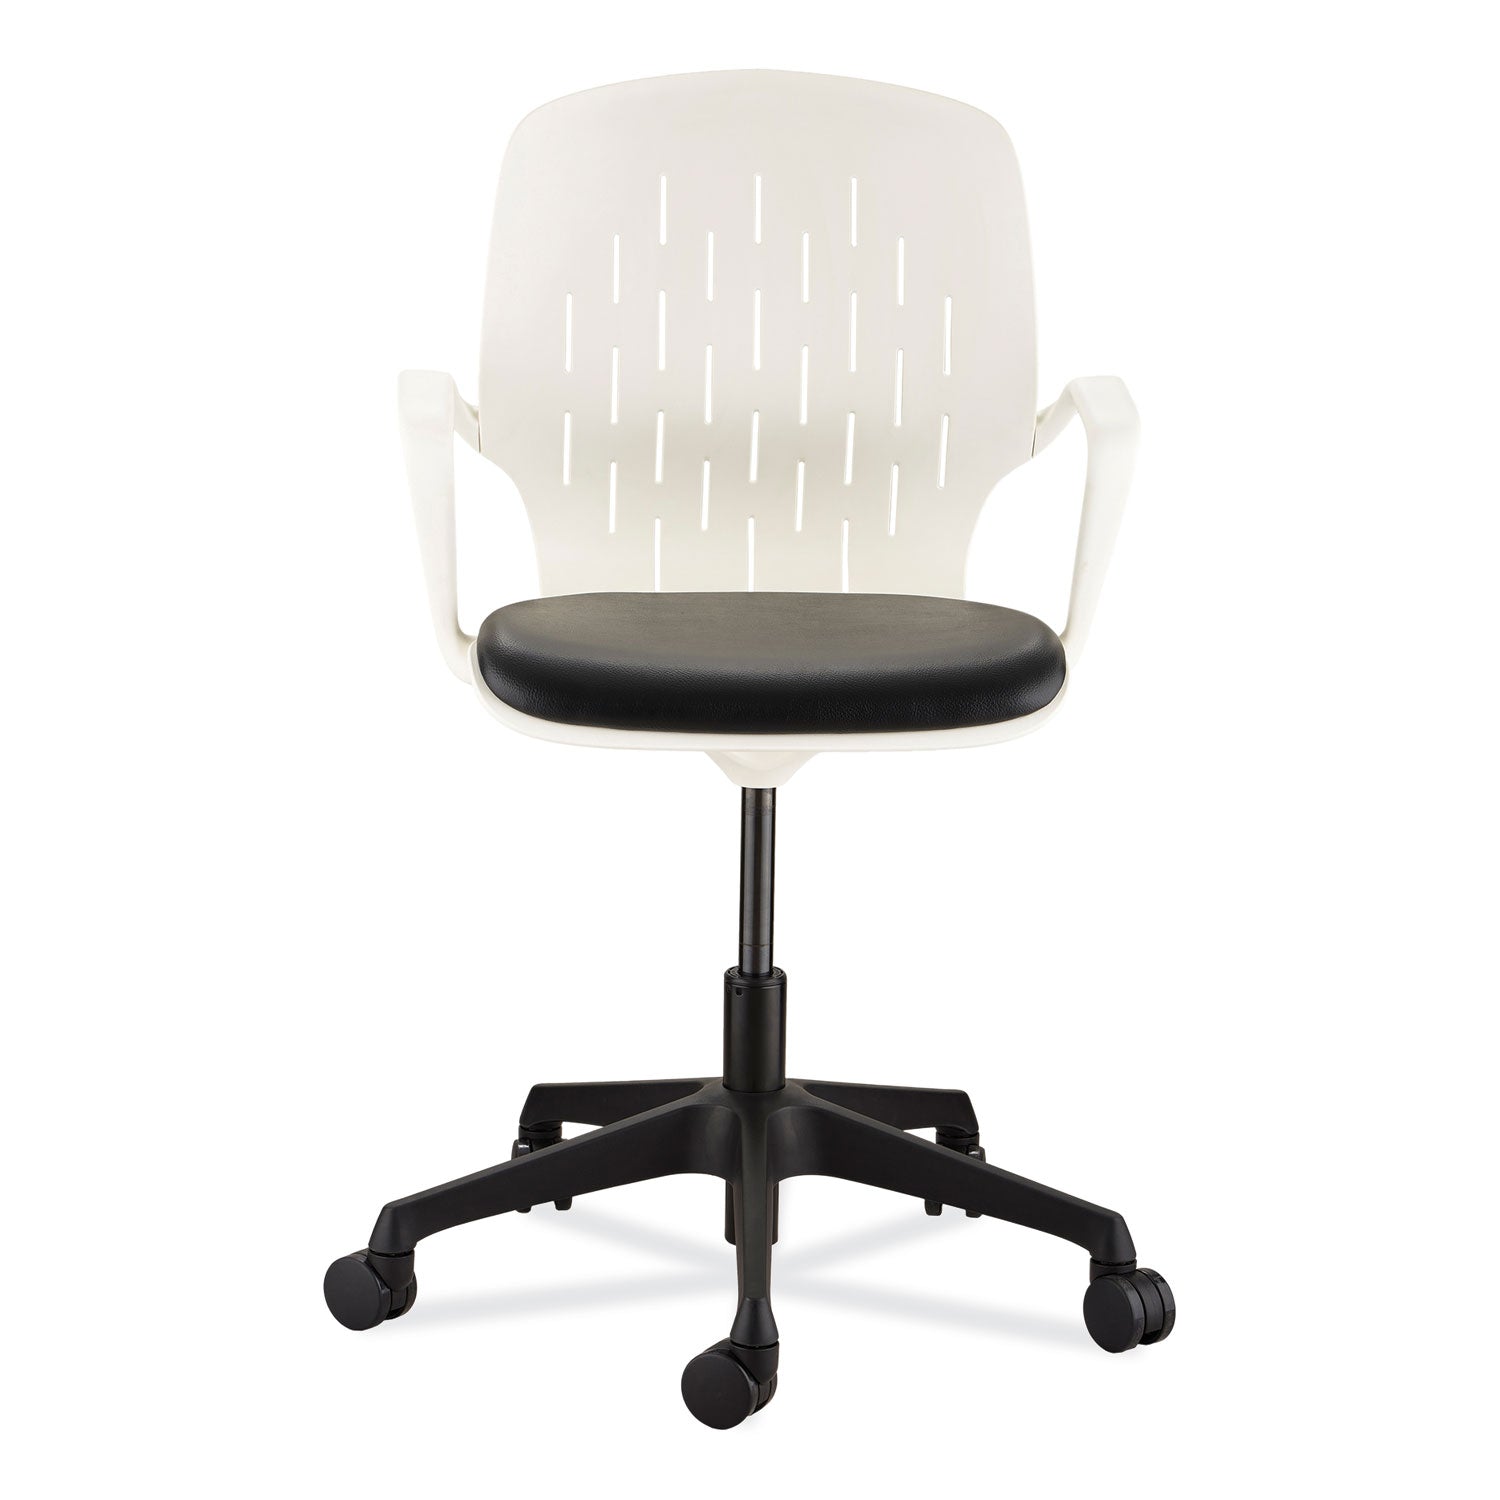 shell-desk-chair-supports-up-to-275-lb-17-to-20-high-black-seat-white-back-black-white-base-ships-in-1-3-business-days_saf7013wh - 3